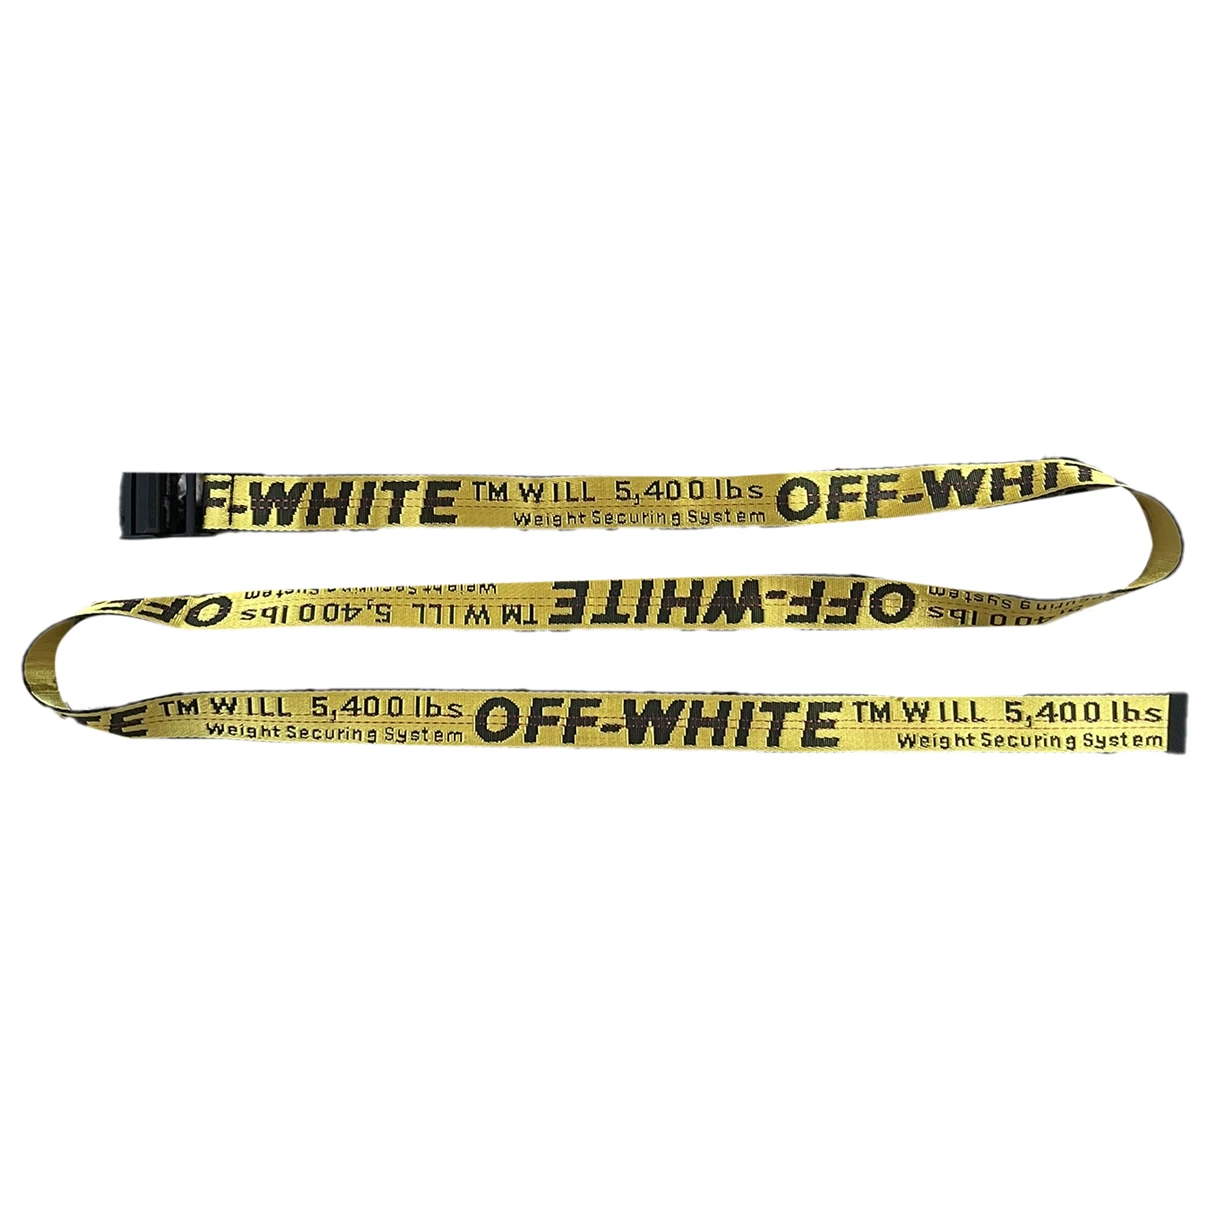 accessories Off-White belts for Male Polyester M International. Used condition